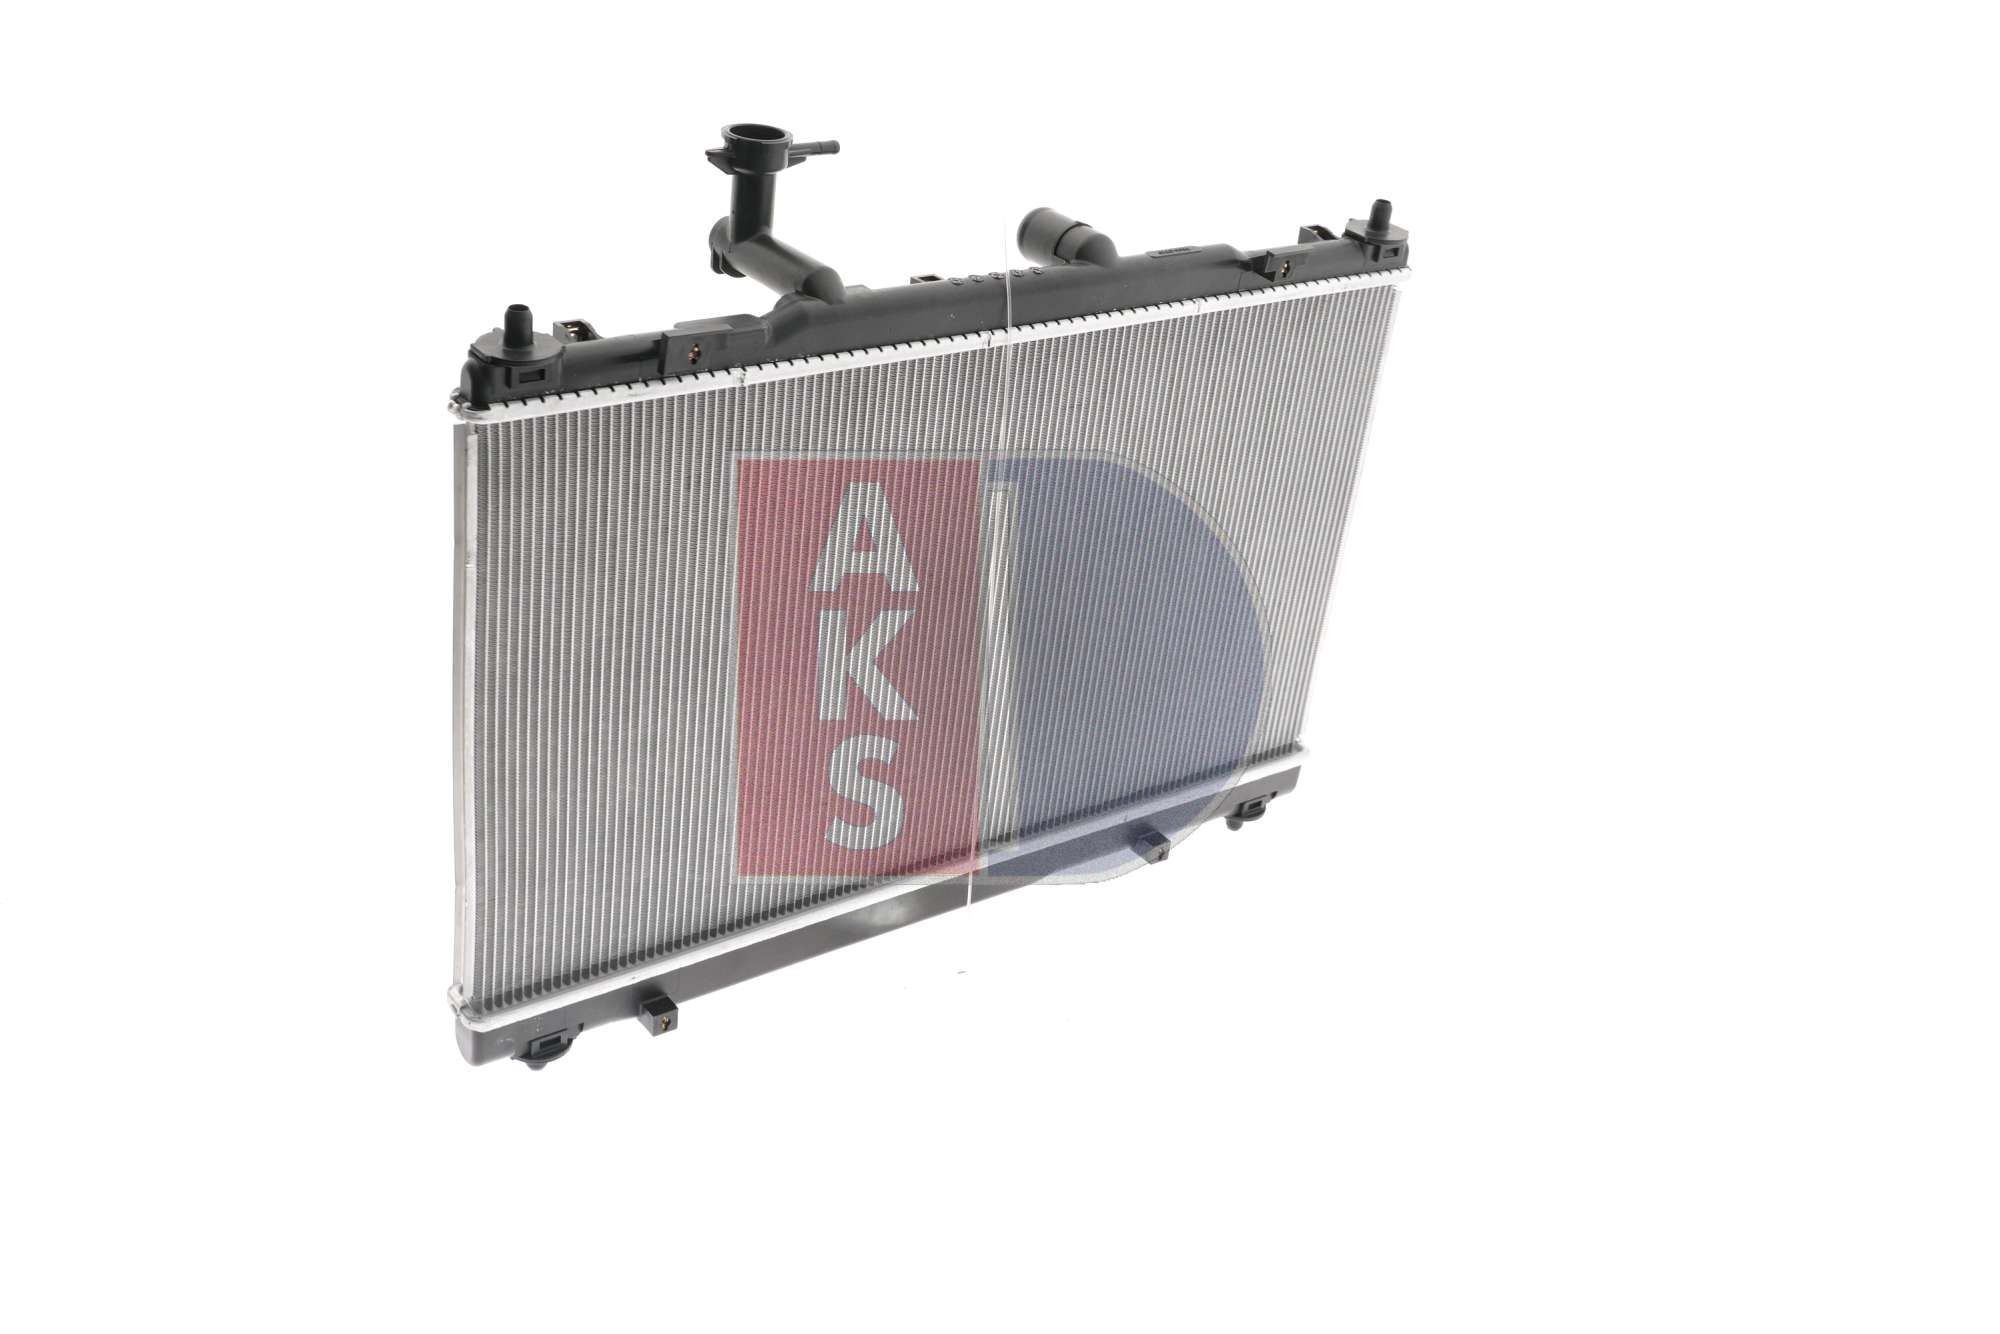 320065N Radiator 320065N AKS DASIS Aluminium, for vehicles with/without air conditioning, 375 x 682 x 16 mm, Automatic Transmission, Brazed cooling fins